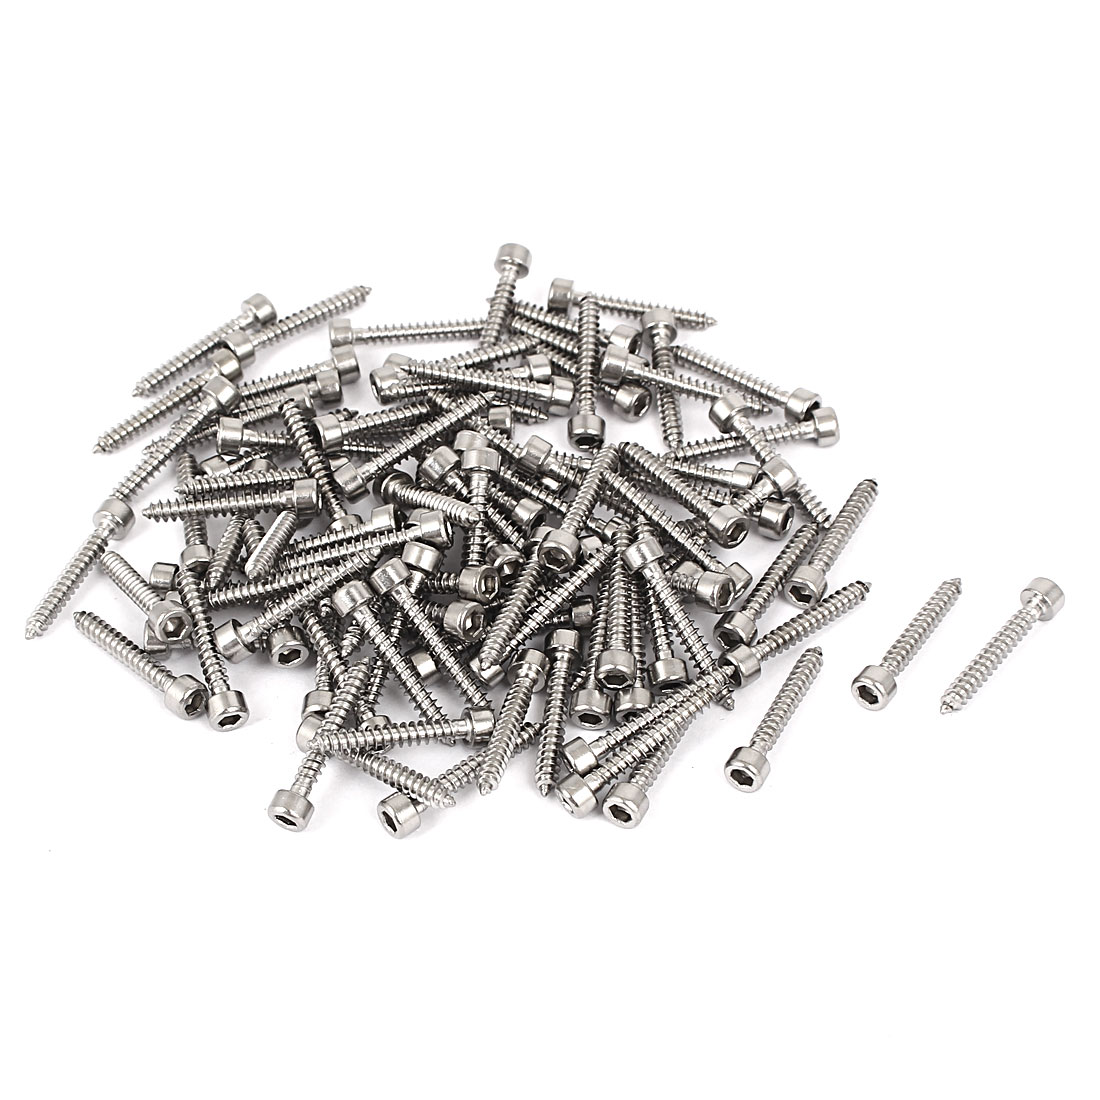 Uxcell M3 x 20mm Threaded Nickel Plated Hex Head Self Tapping Screws (100-pack) - image 2 of 2